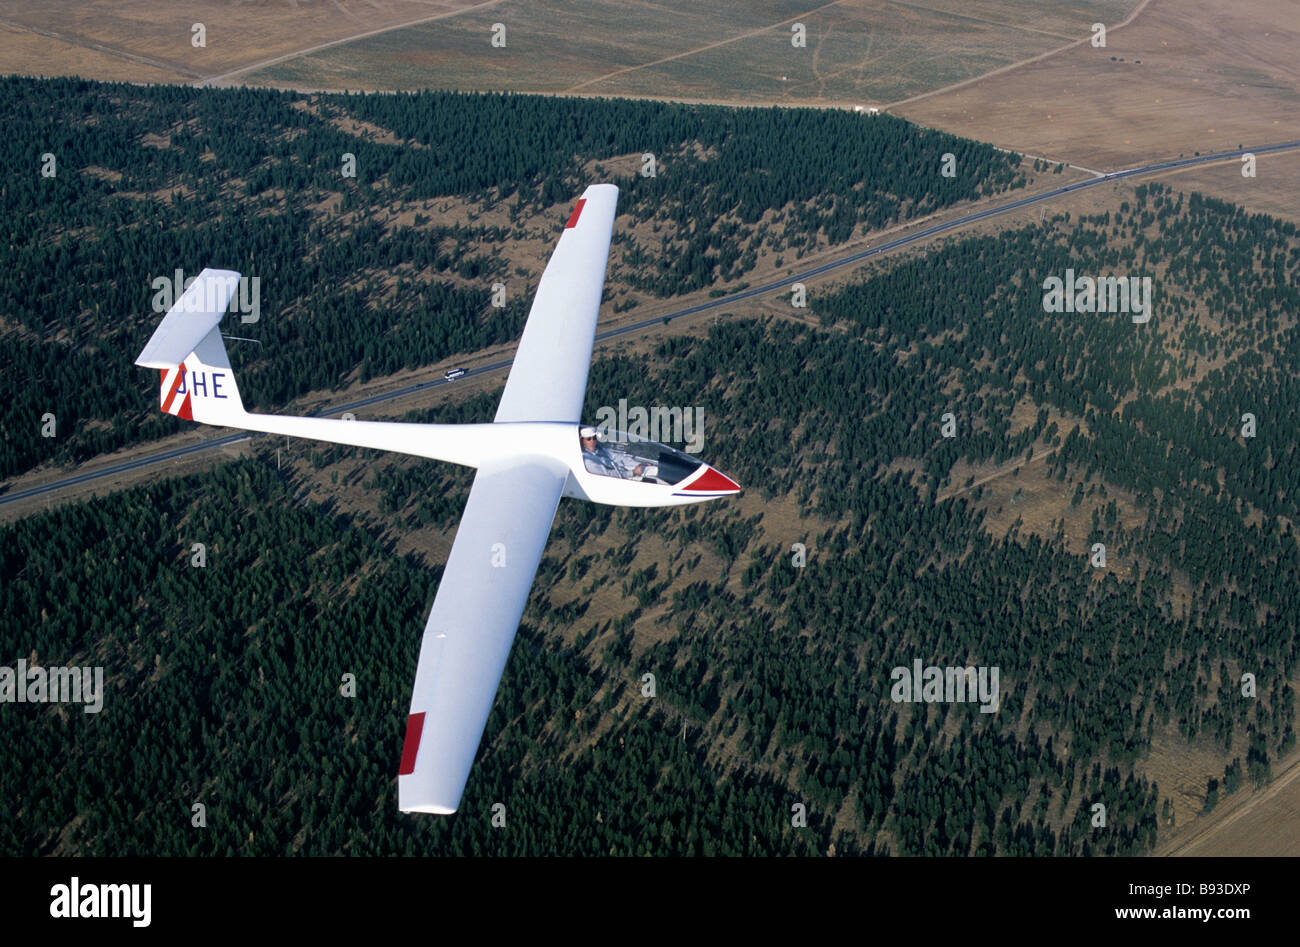 A glider flying over the Alentejo countryside in southern Portugal Stock Photo